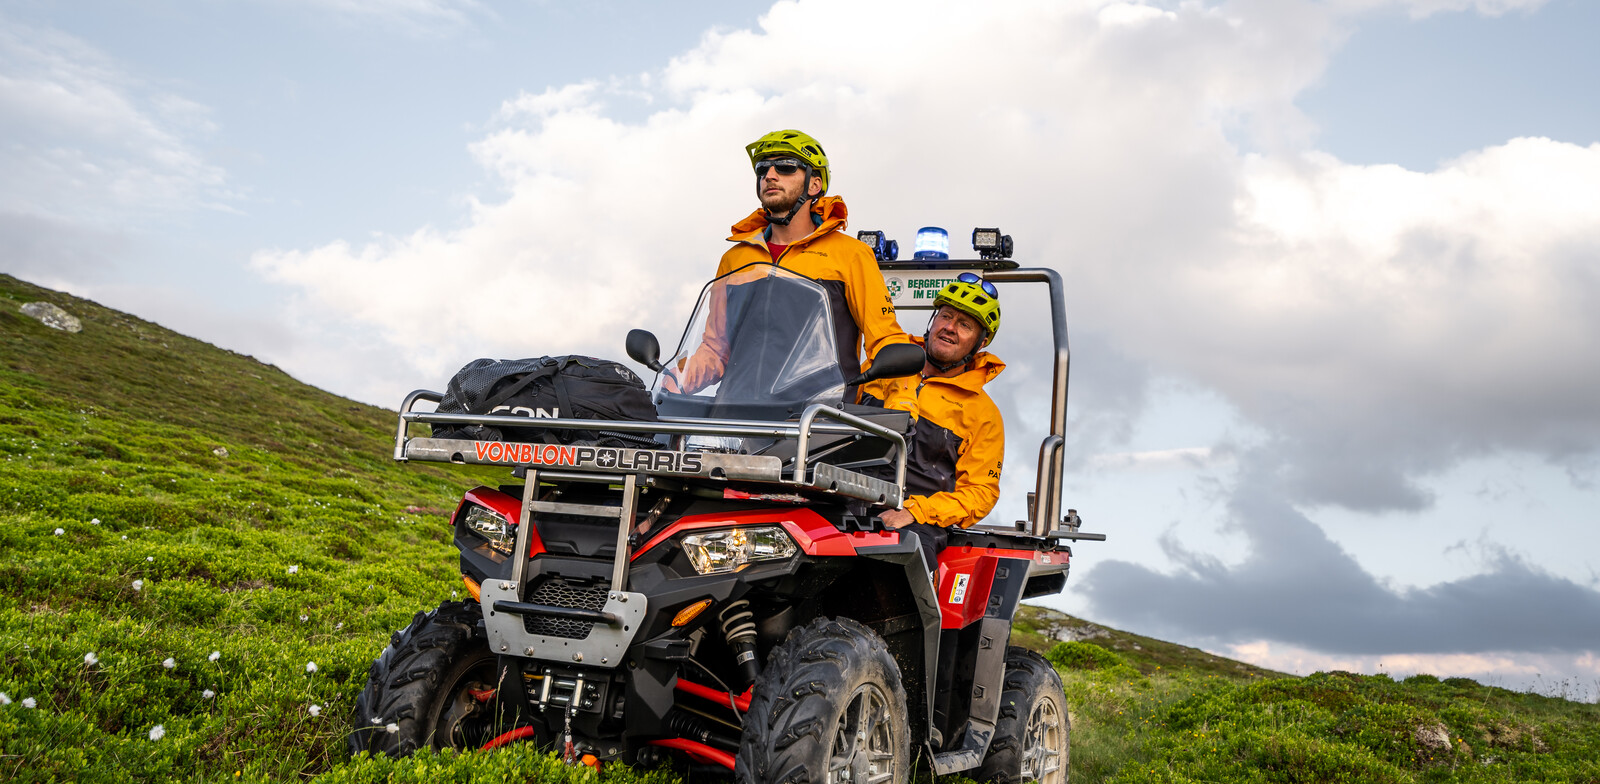 Quads are also available for the Bike Patrol. | © © saalbach.com, Wout van de Donk